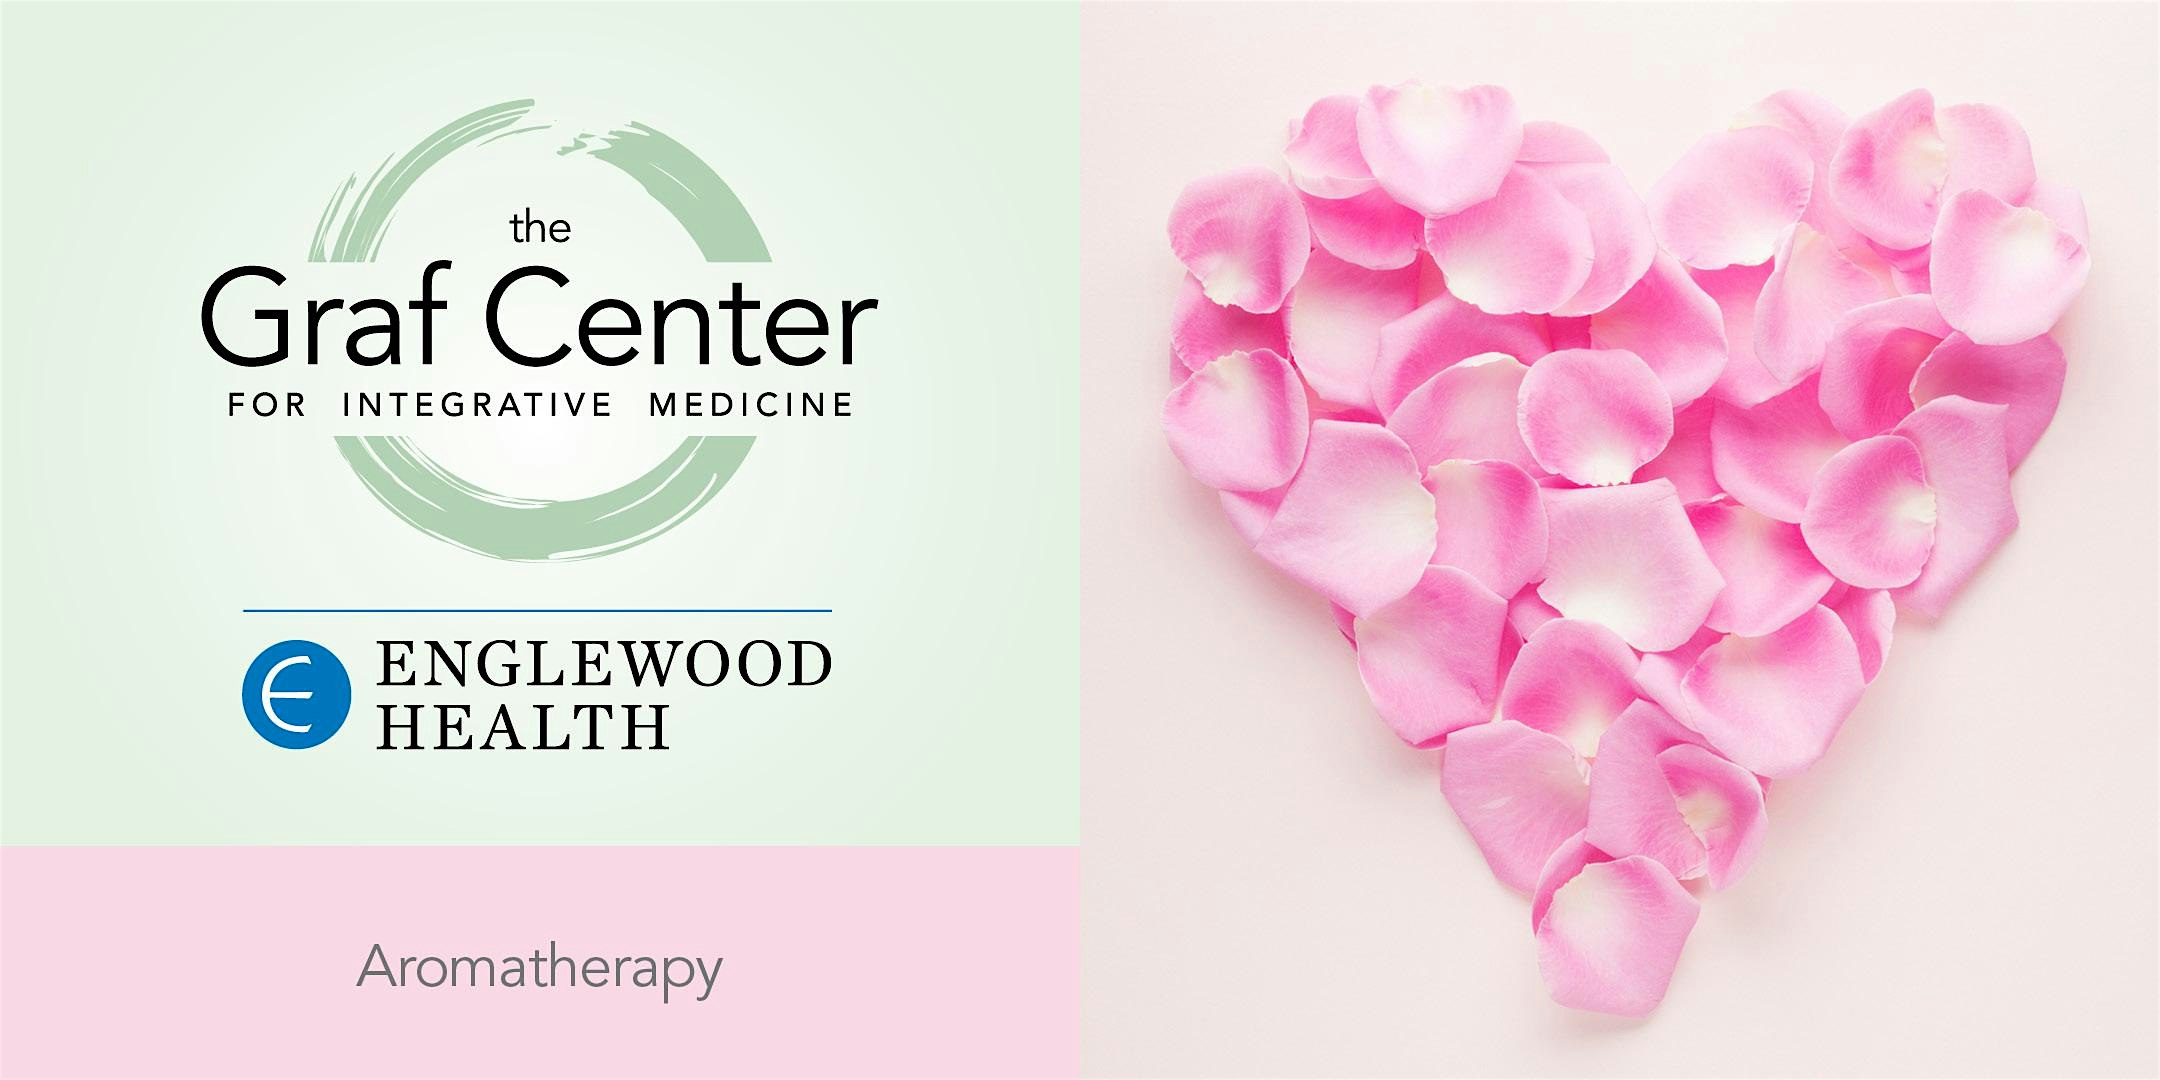 More info: Aromatherapy for Valentine’s Day - January 24